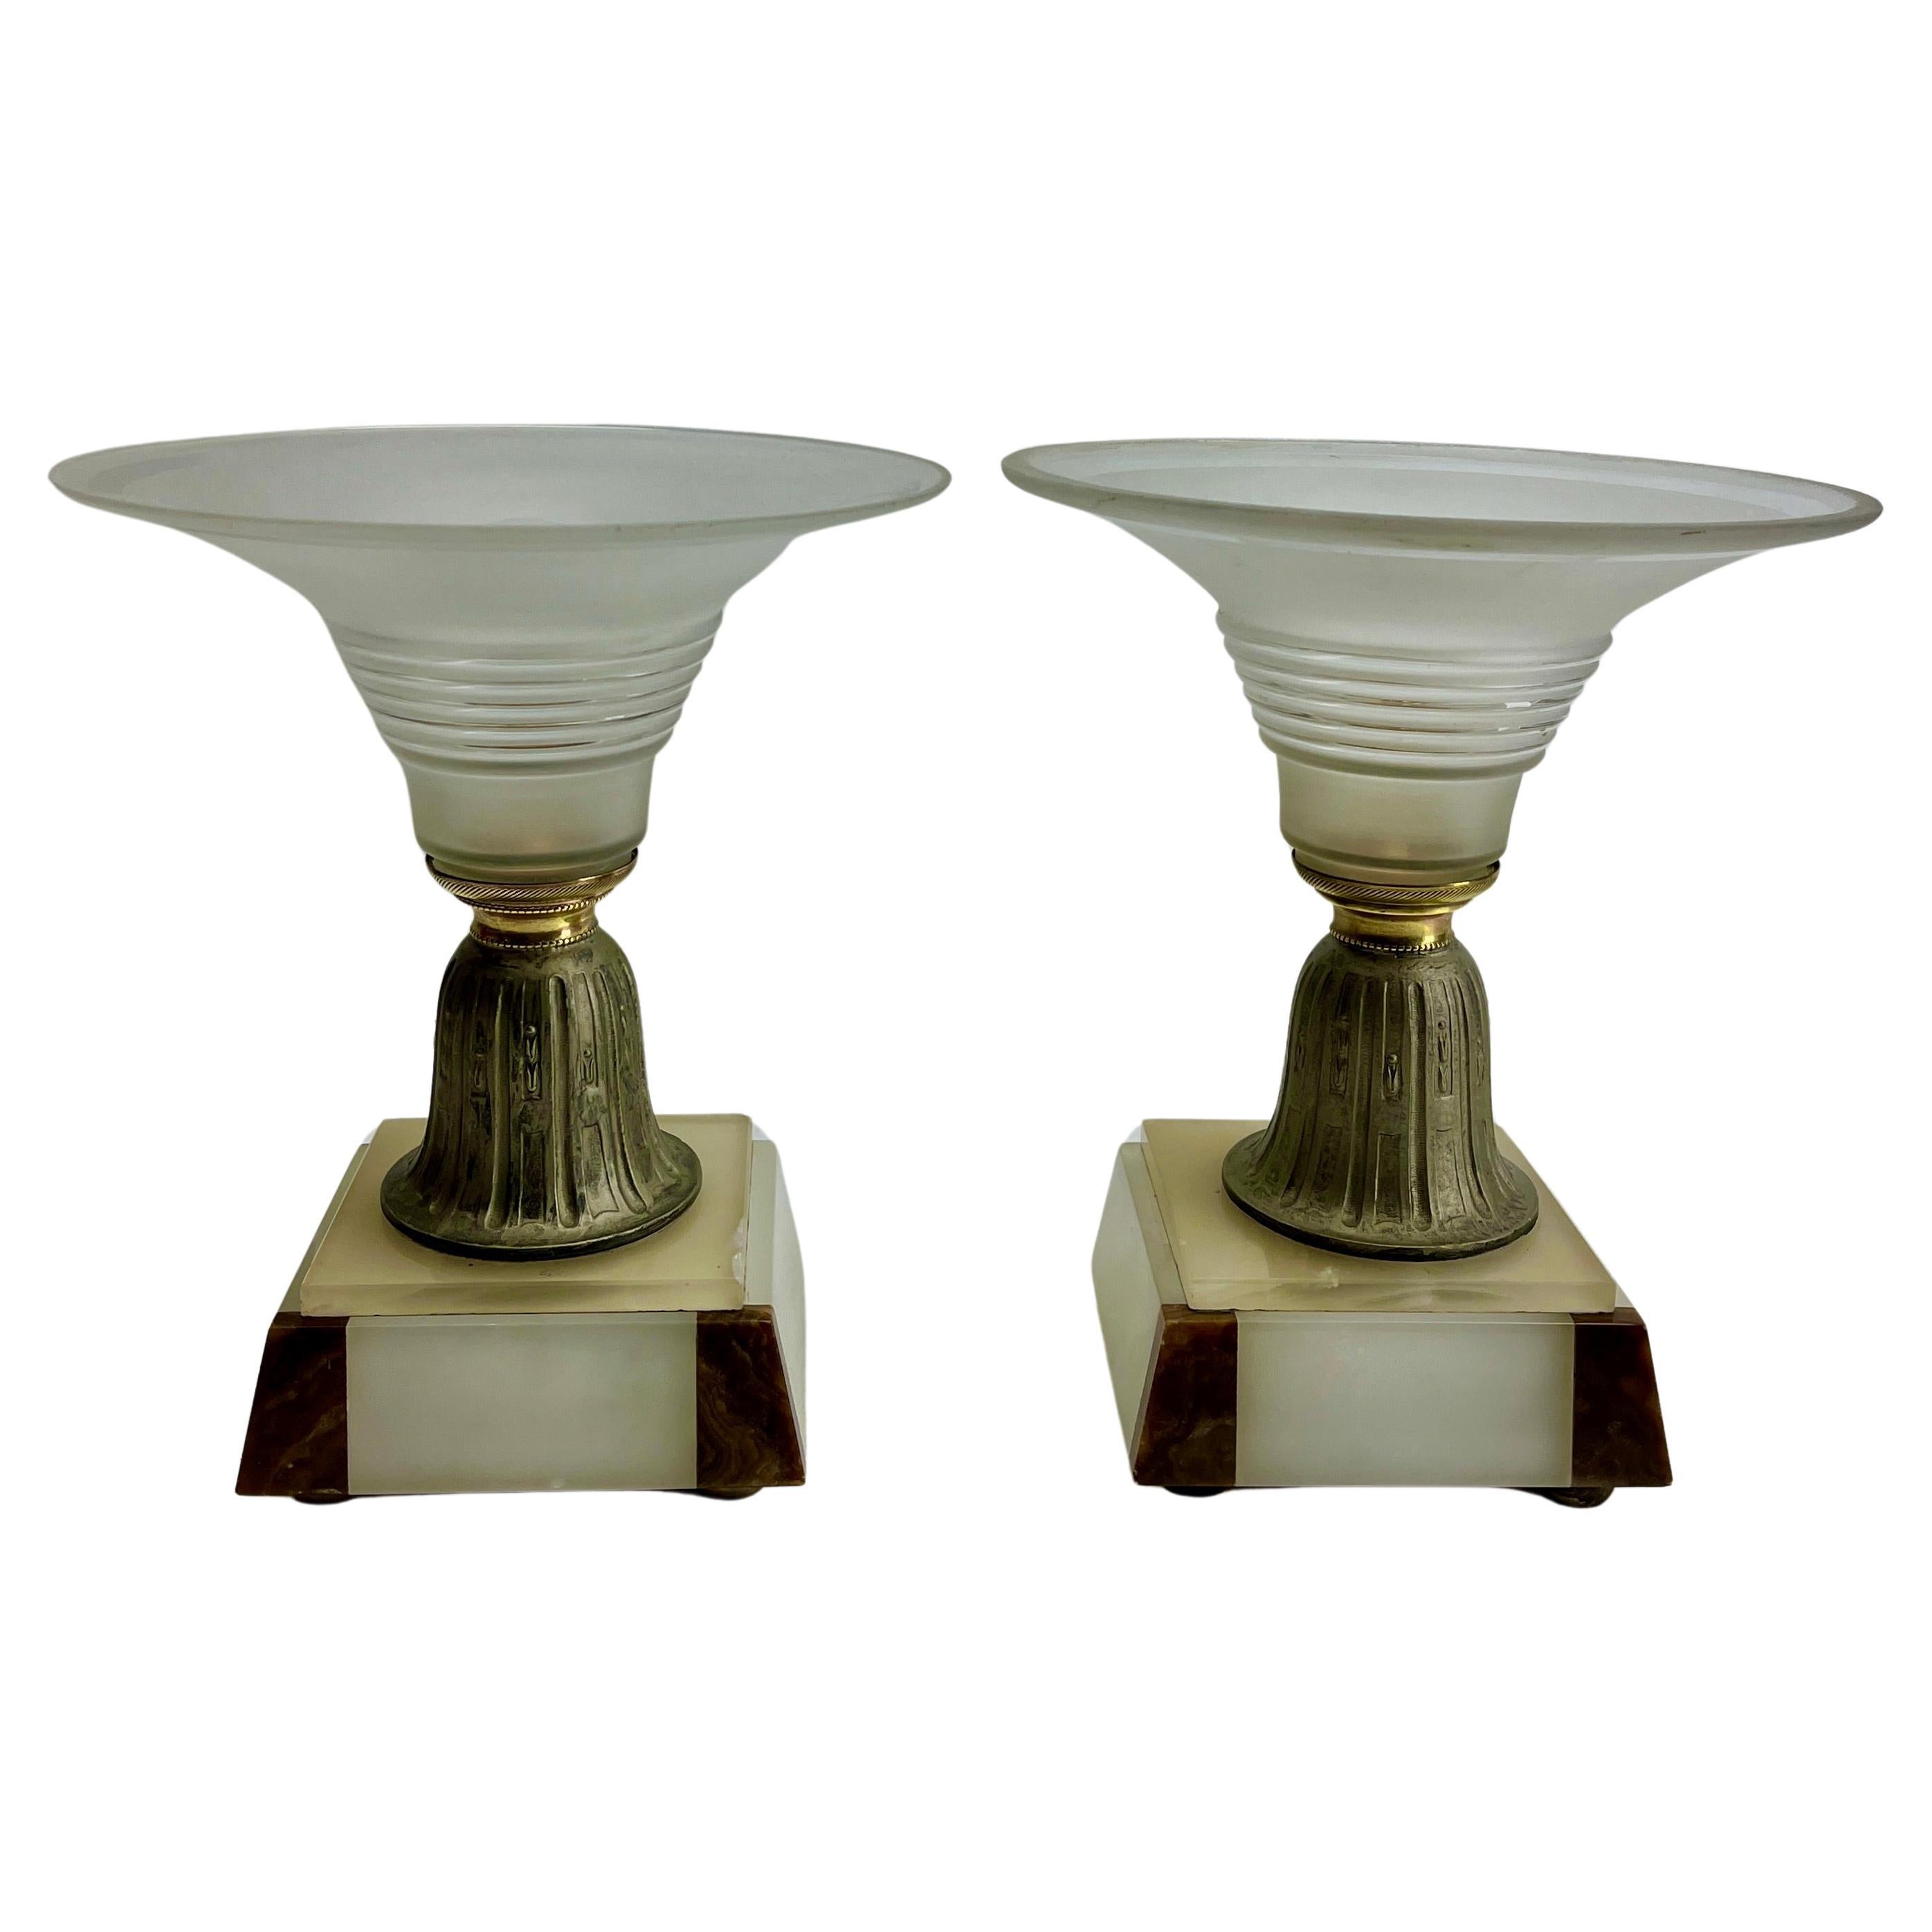 Art Deco Pair Pedestal Bowls with stylized Bronze  on Onyx Plint

With Bronze, Brass and Onyx Details
Originel Patina on all Parts
The pieces are in Good and original condition and a real beauty!

Looks simply stunning.
























